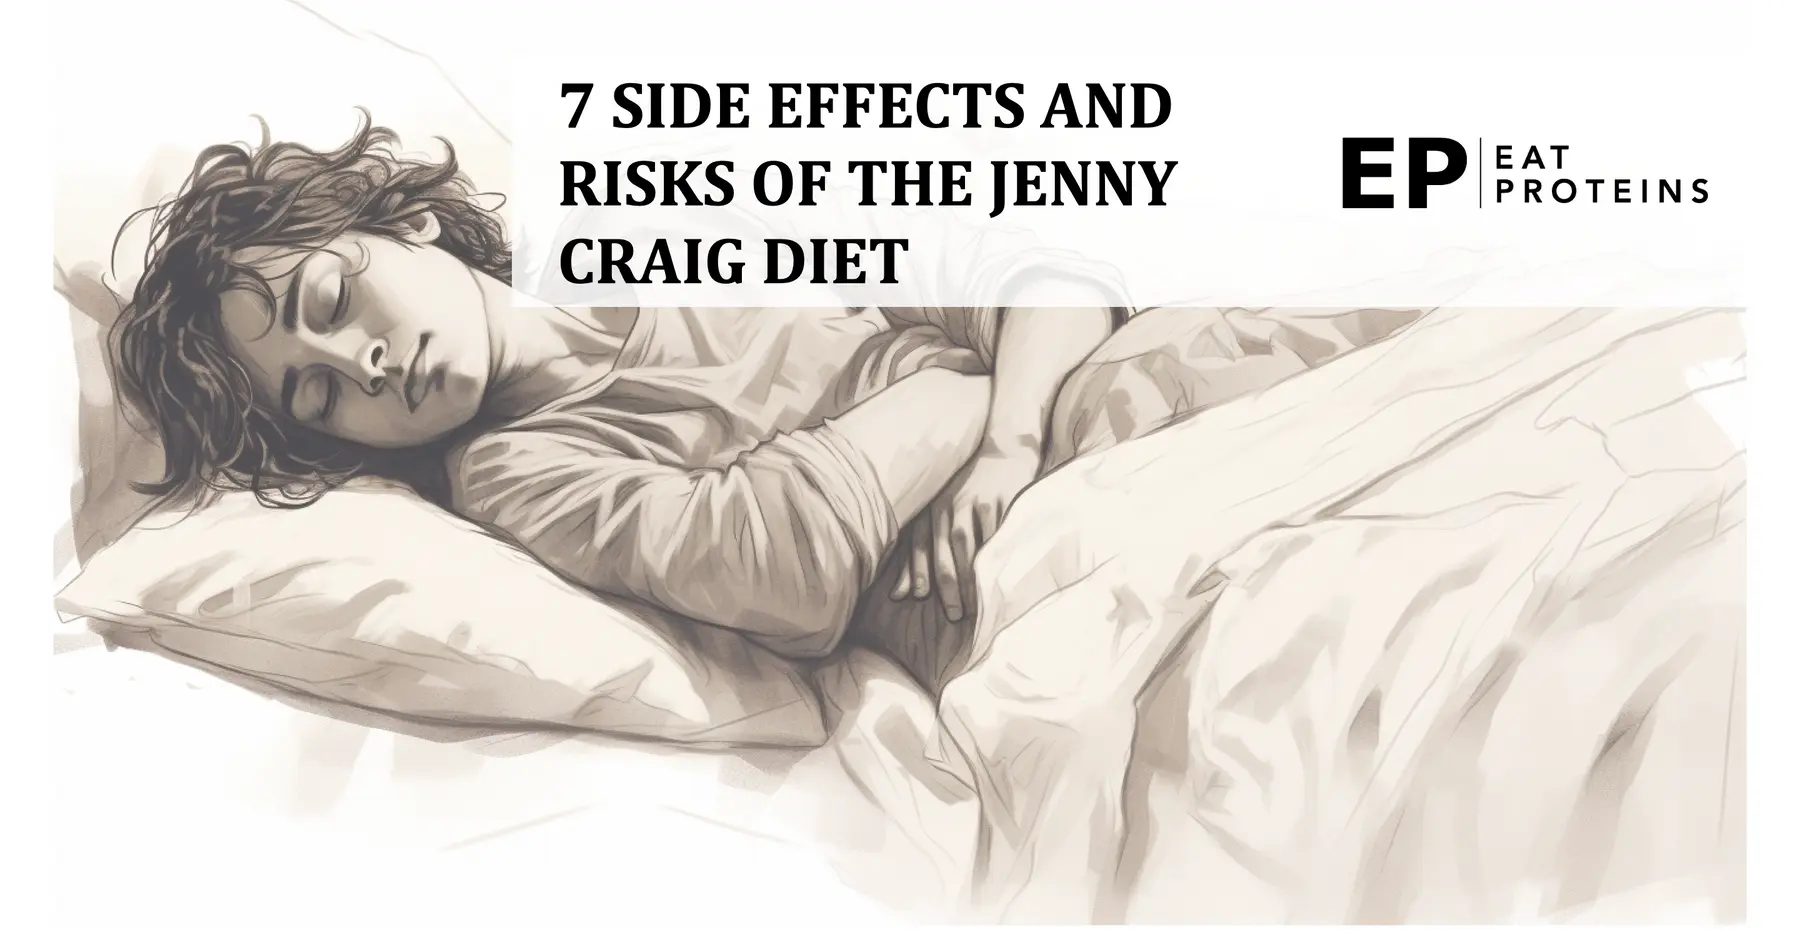 Jenny Craig Diet Side Effects and Risks